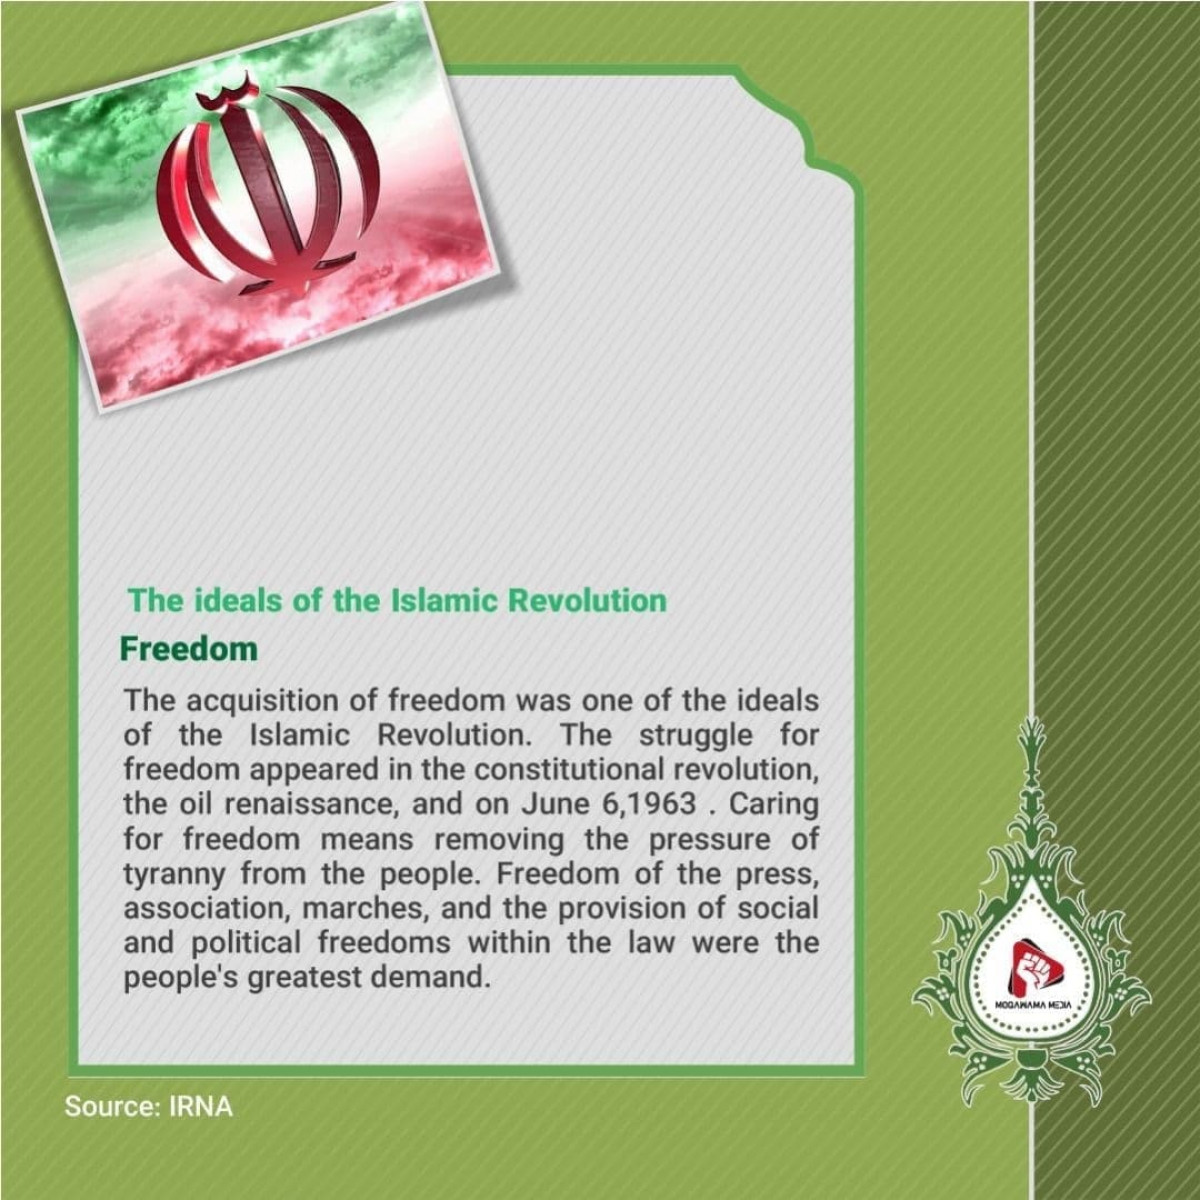 The ideals of the Islamic Revolution9